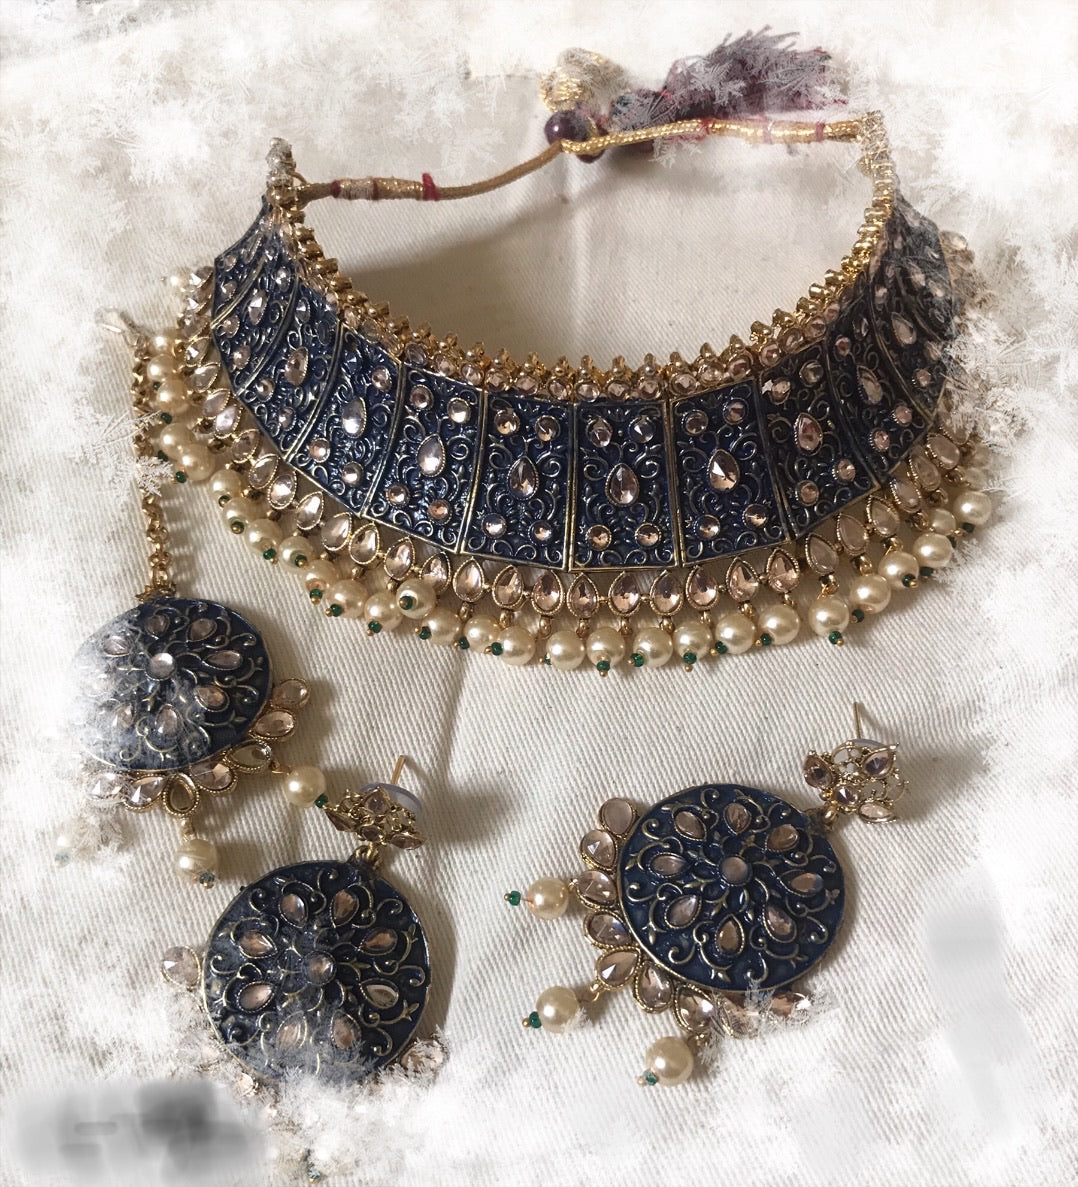 Indian bridal necklace earrings and teeka head jewelry set